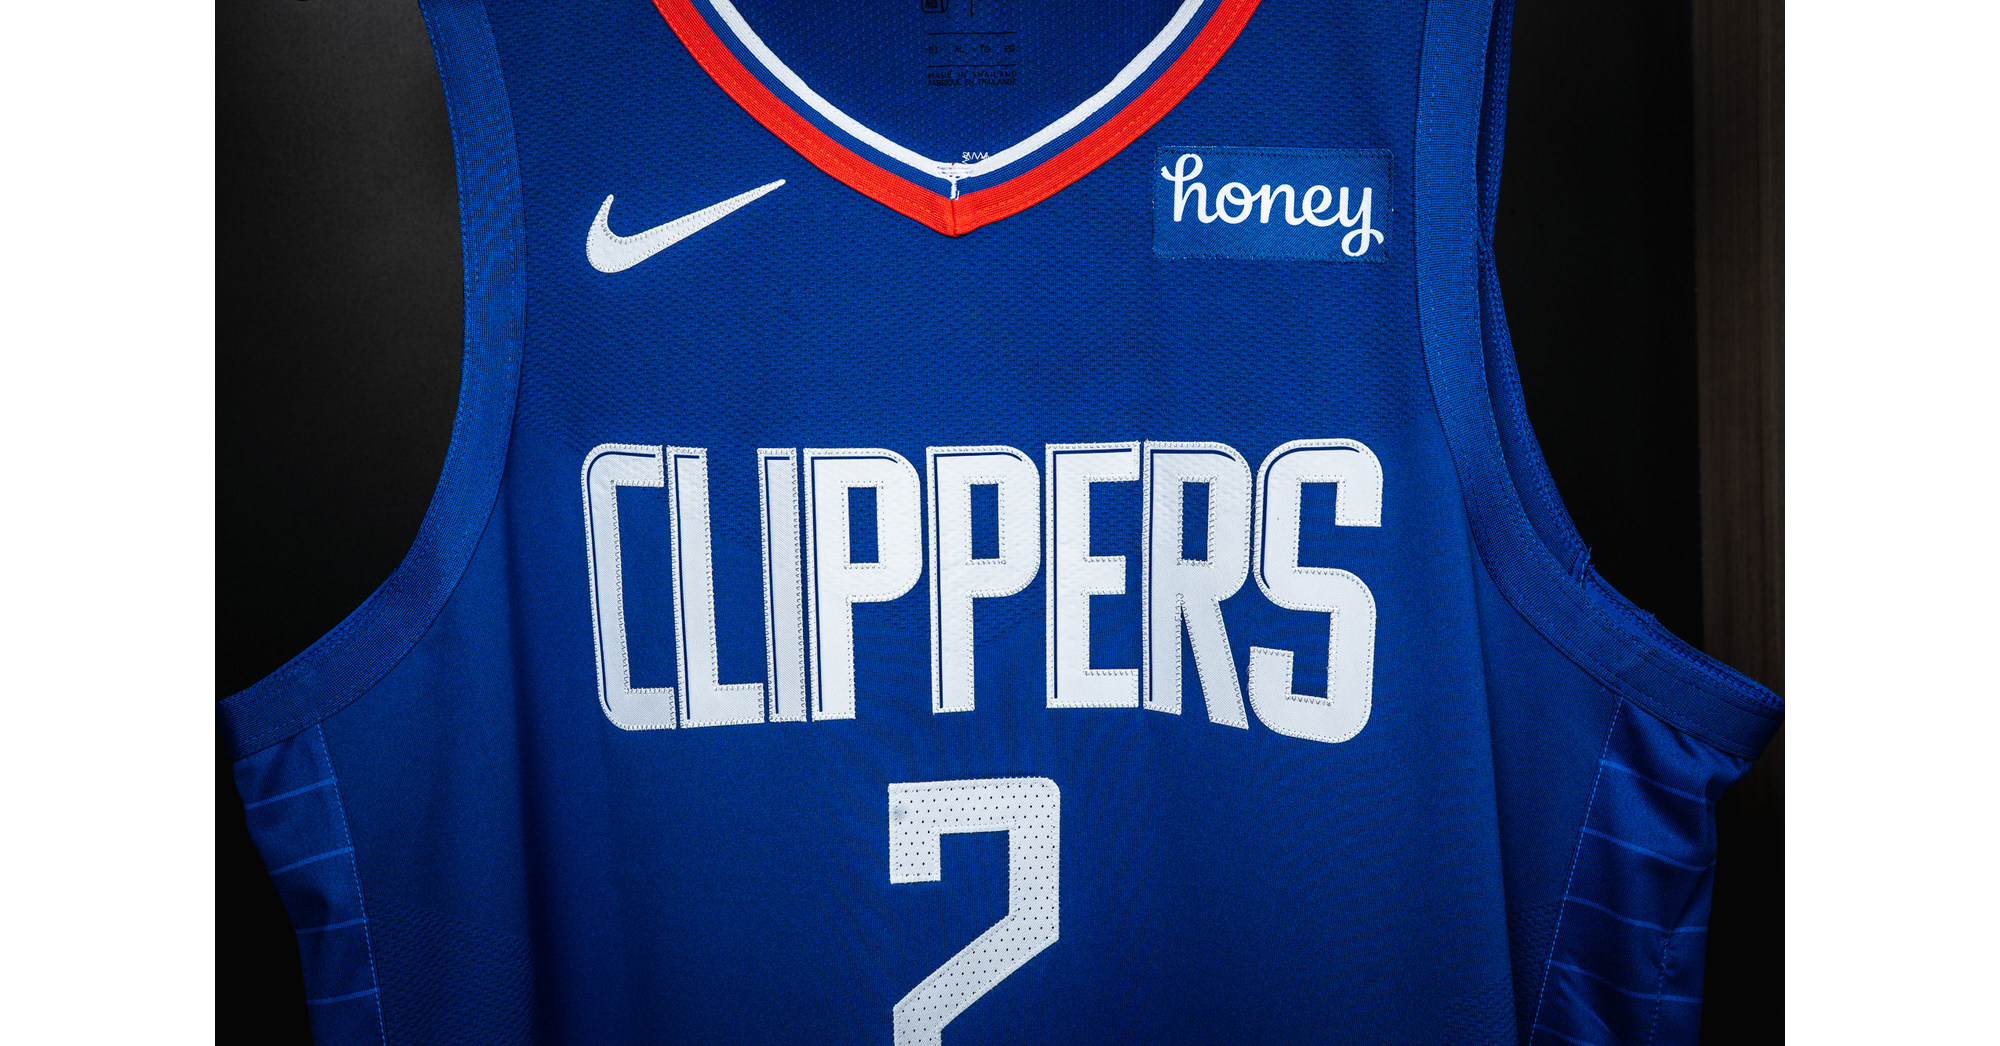 Press Release: Honey and LA Clippers Expand Partnership, Introduce